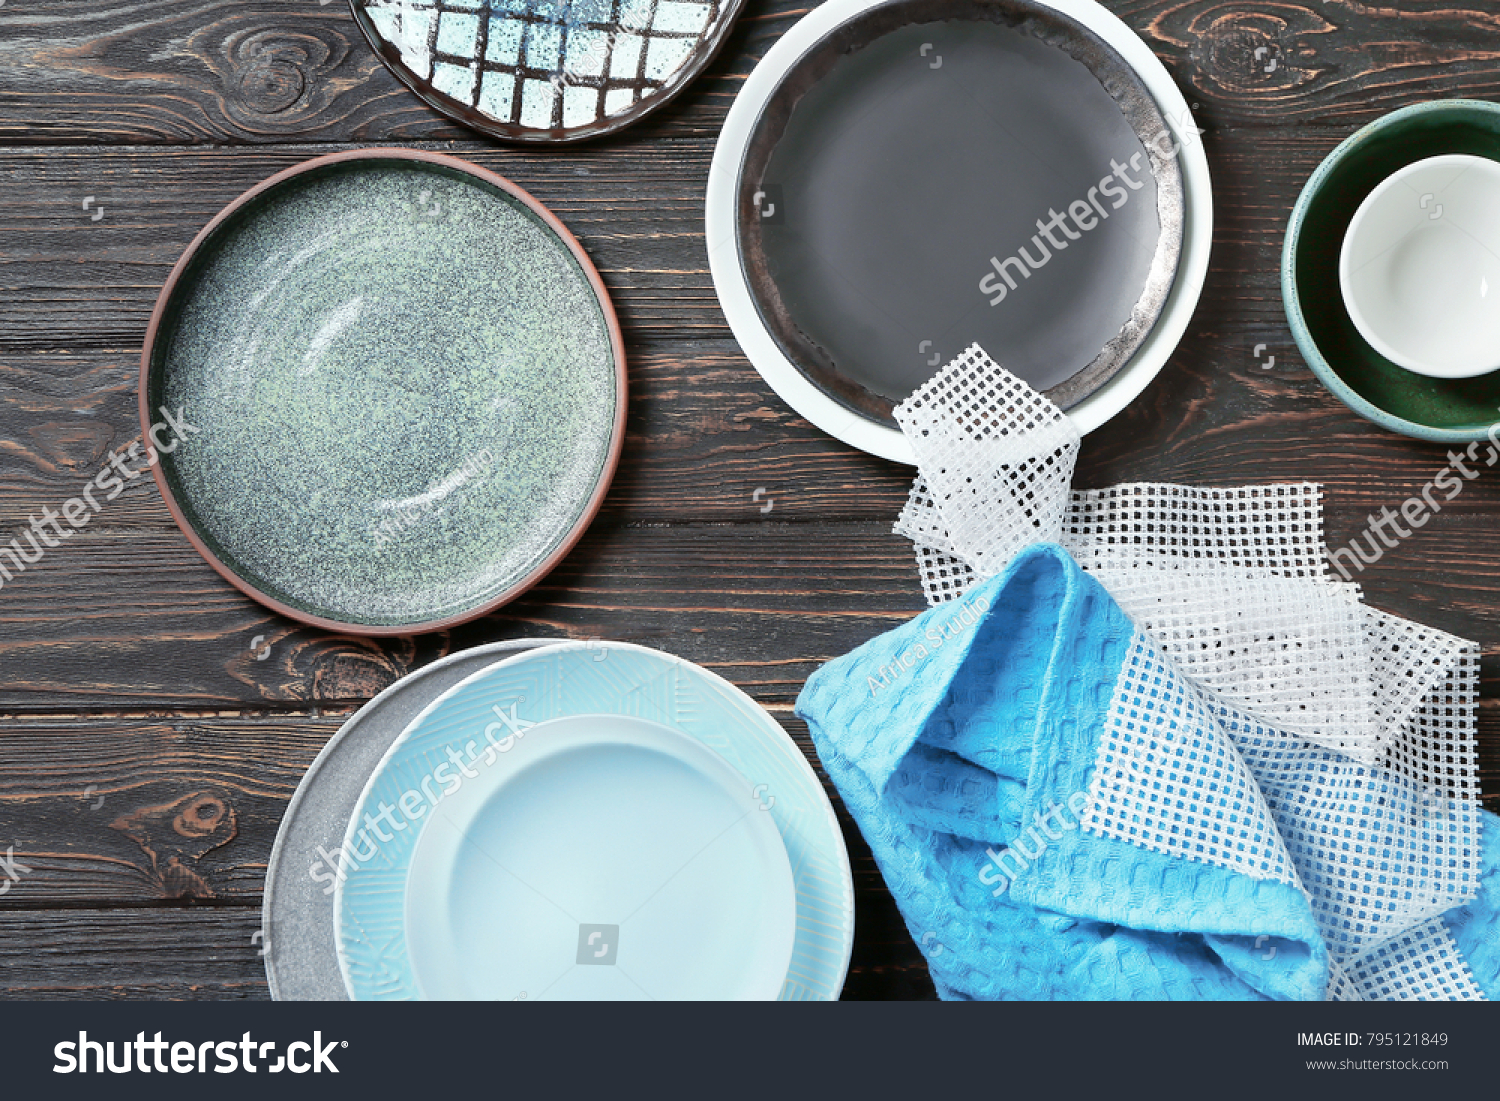 Set of tableware on wooden background #795121849